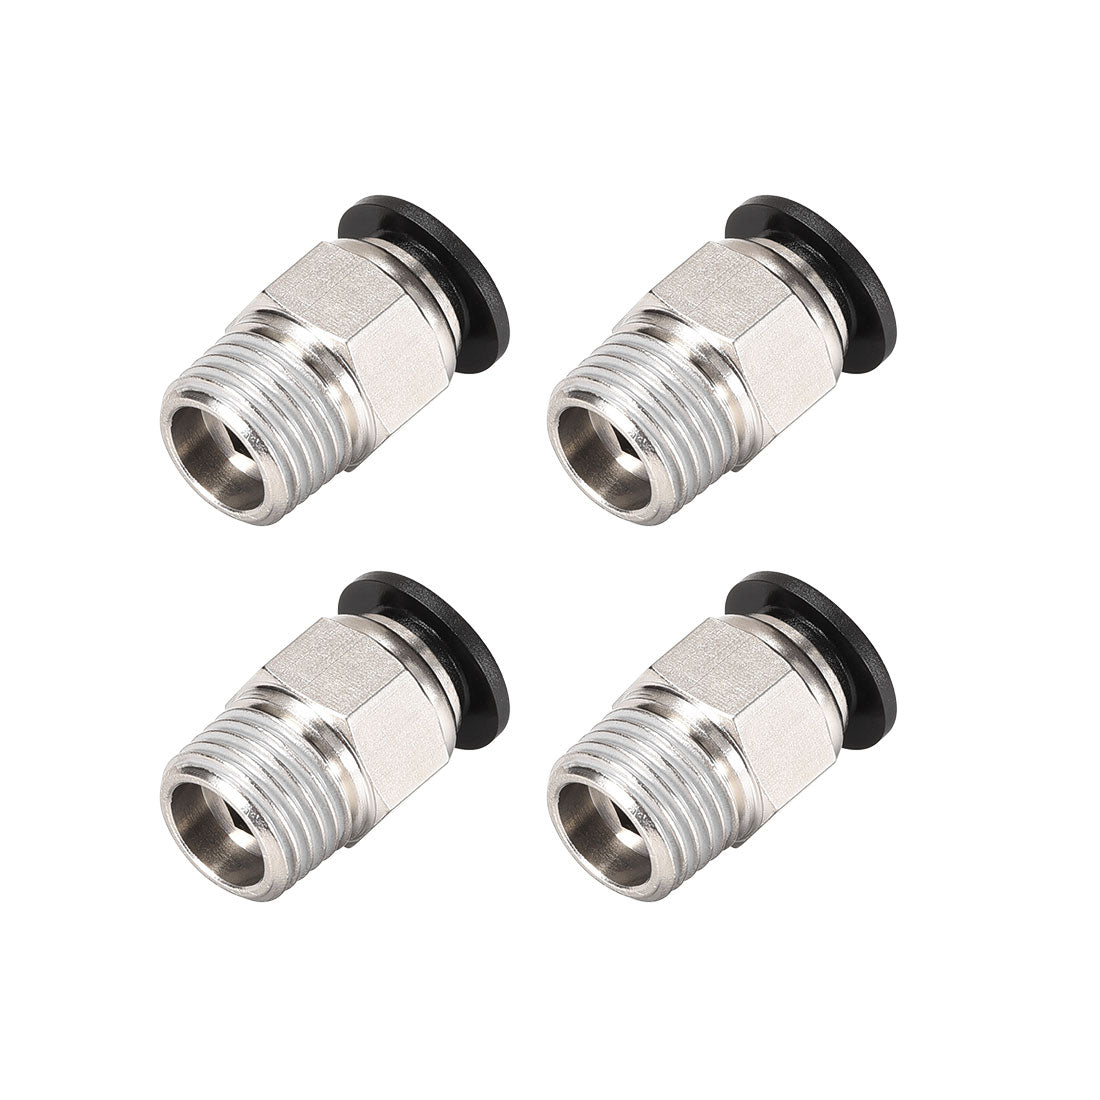 Uxcell Uxcell Straight Pneumatic Push to Quick Connect Fittings 1/4NPT Male x 10mm Tube OD Silver Tone 6pcs